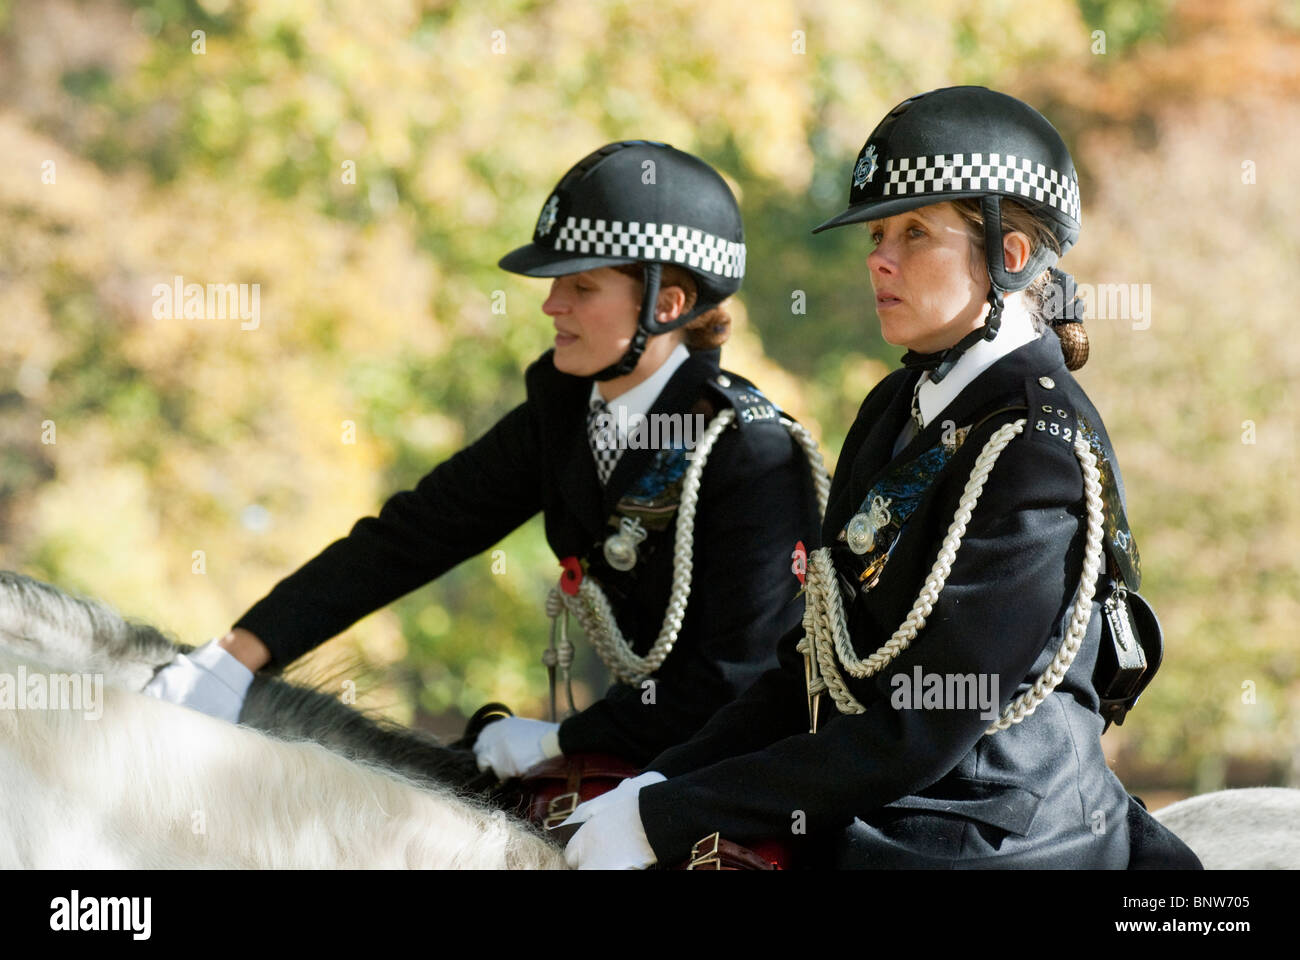 Police including some armed and some on horseback protect a state visit in the Mall, London. Stock Photo